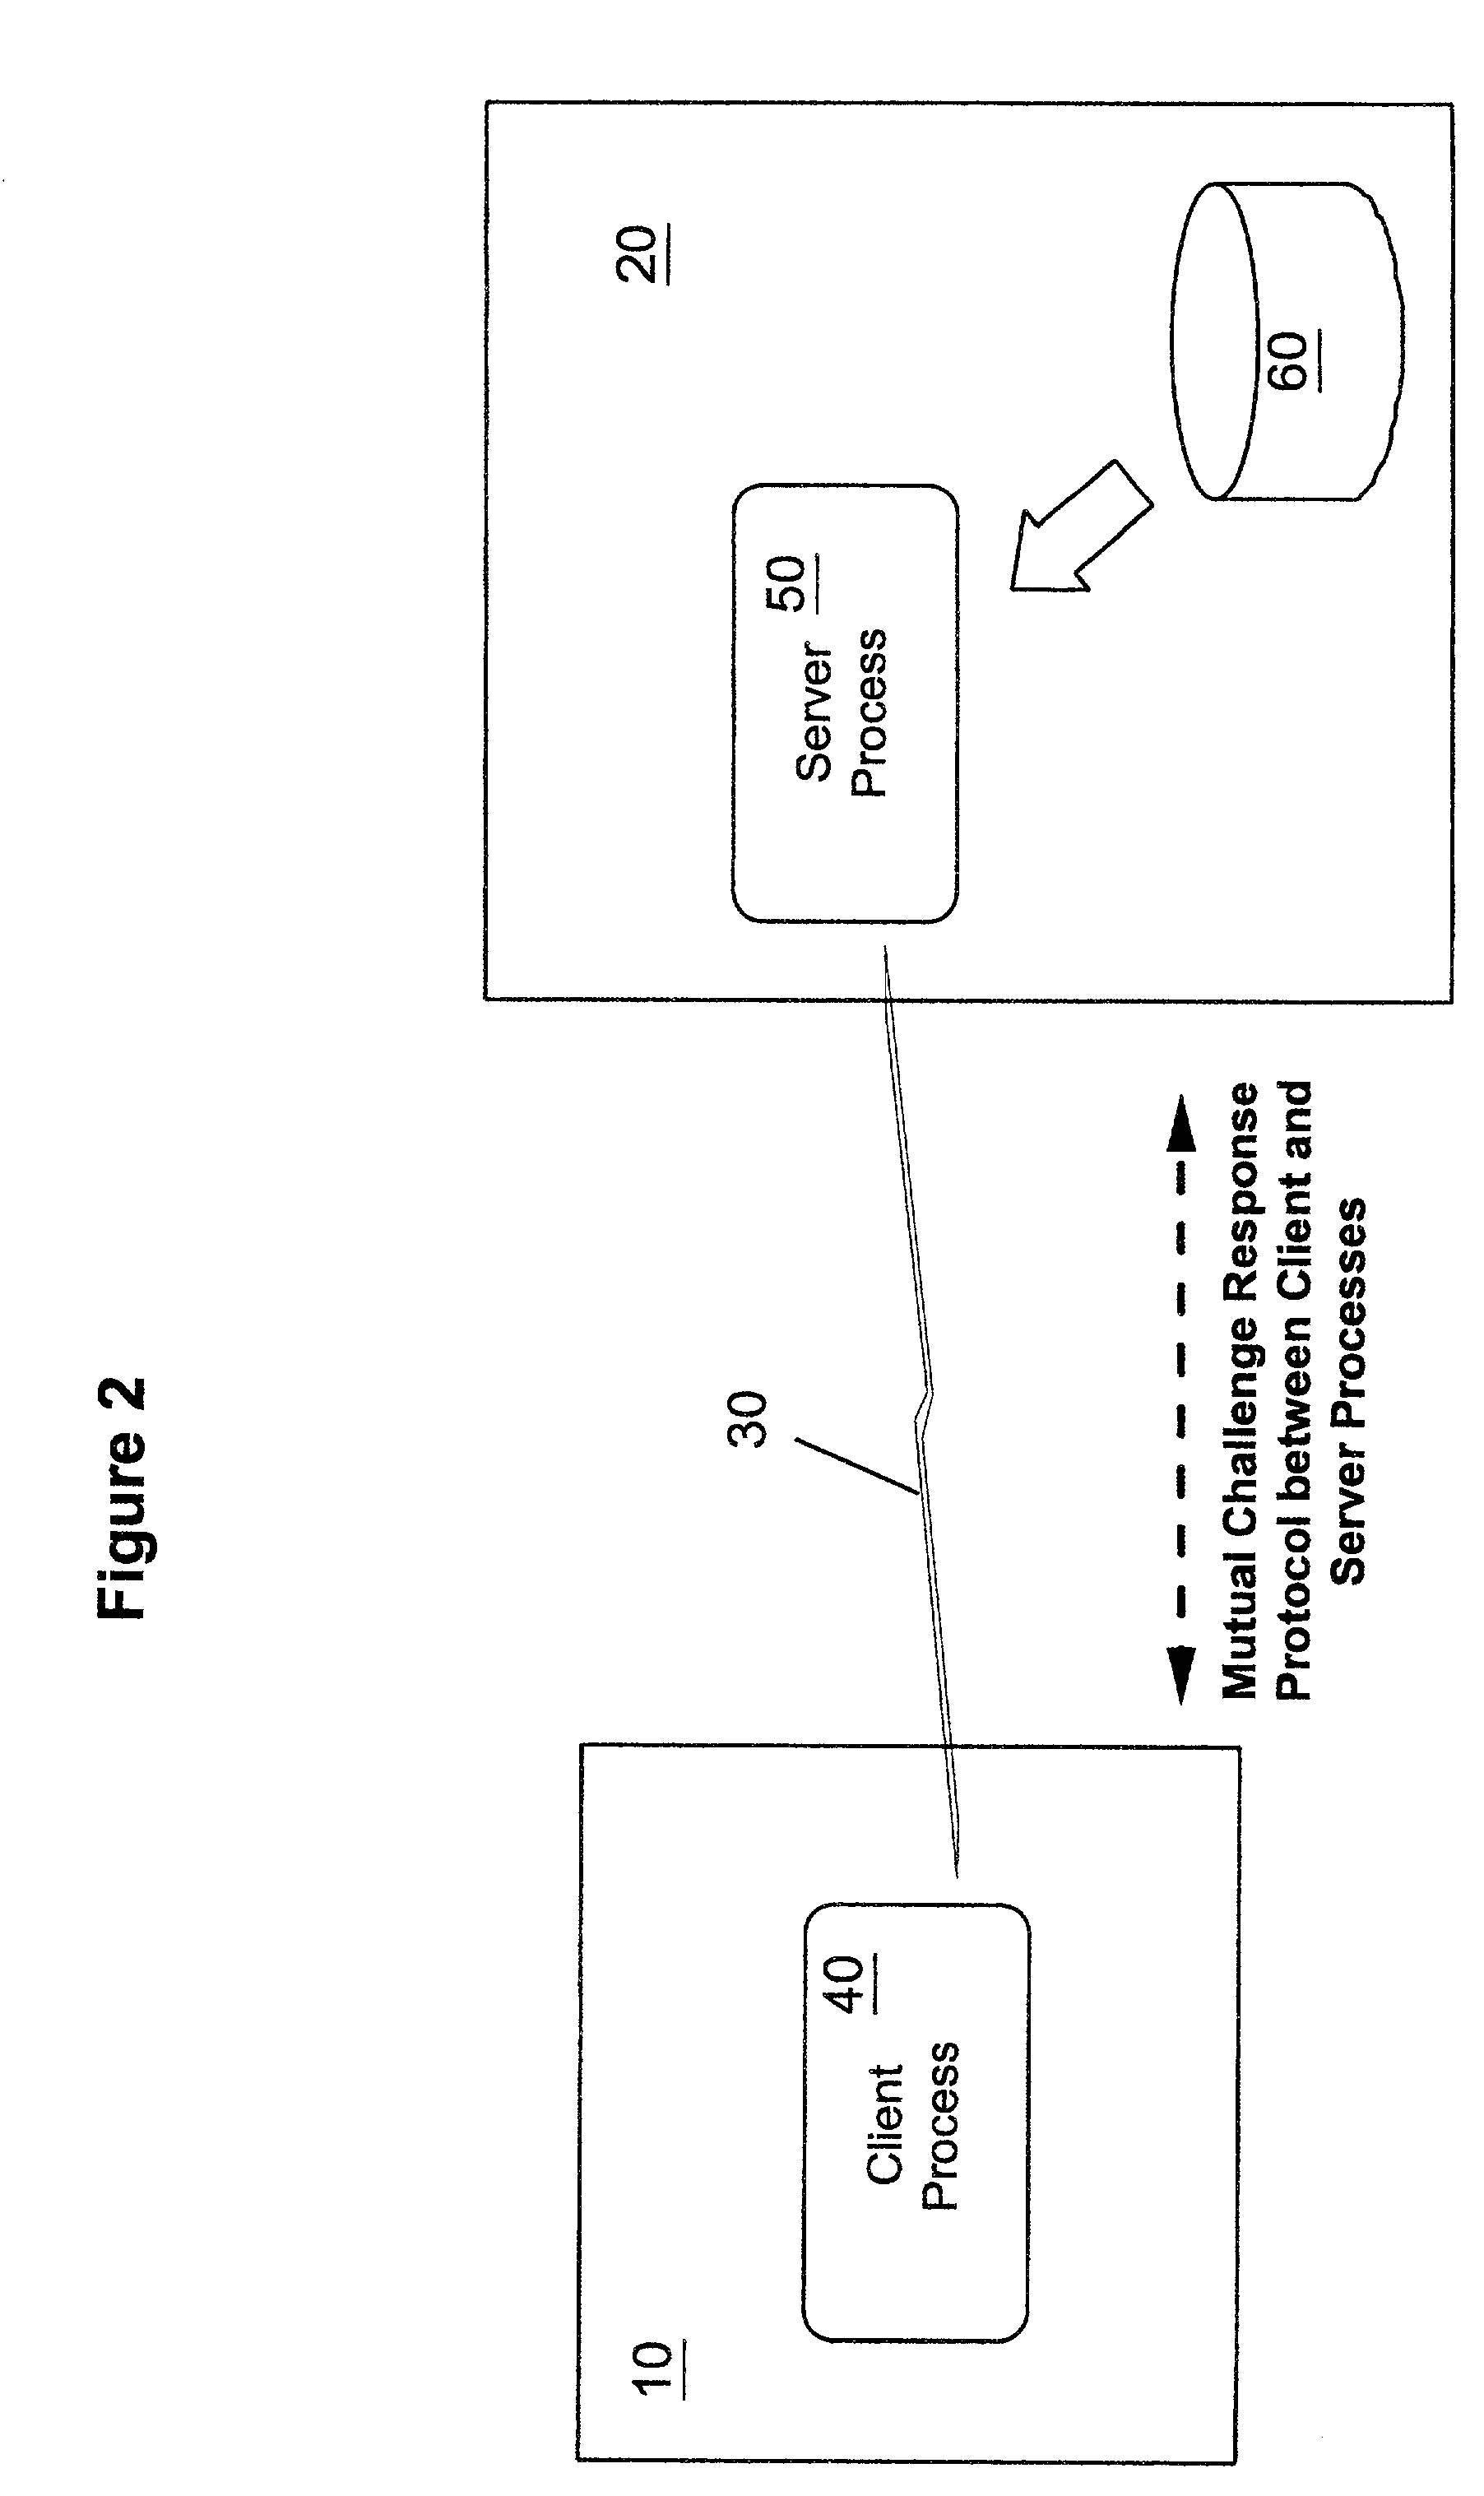 Methods, apparatus and computer programs performing a mutual challenge-response authentication protocol using operating system capabilities